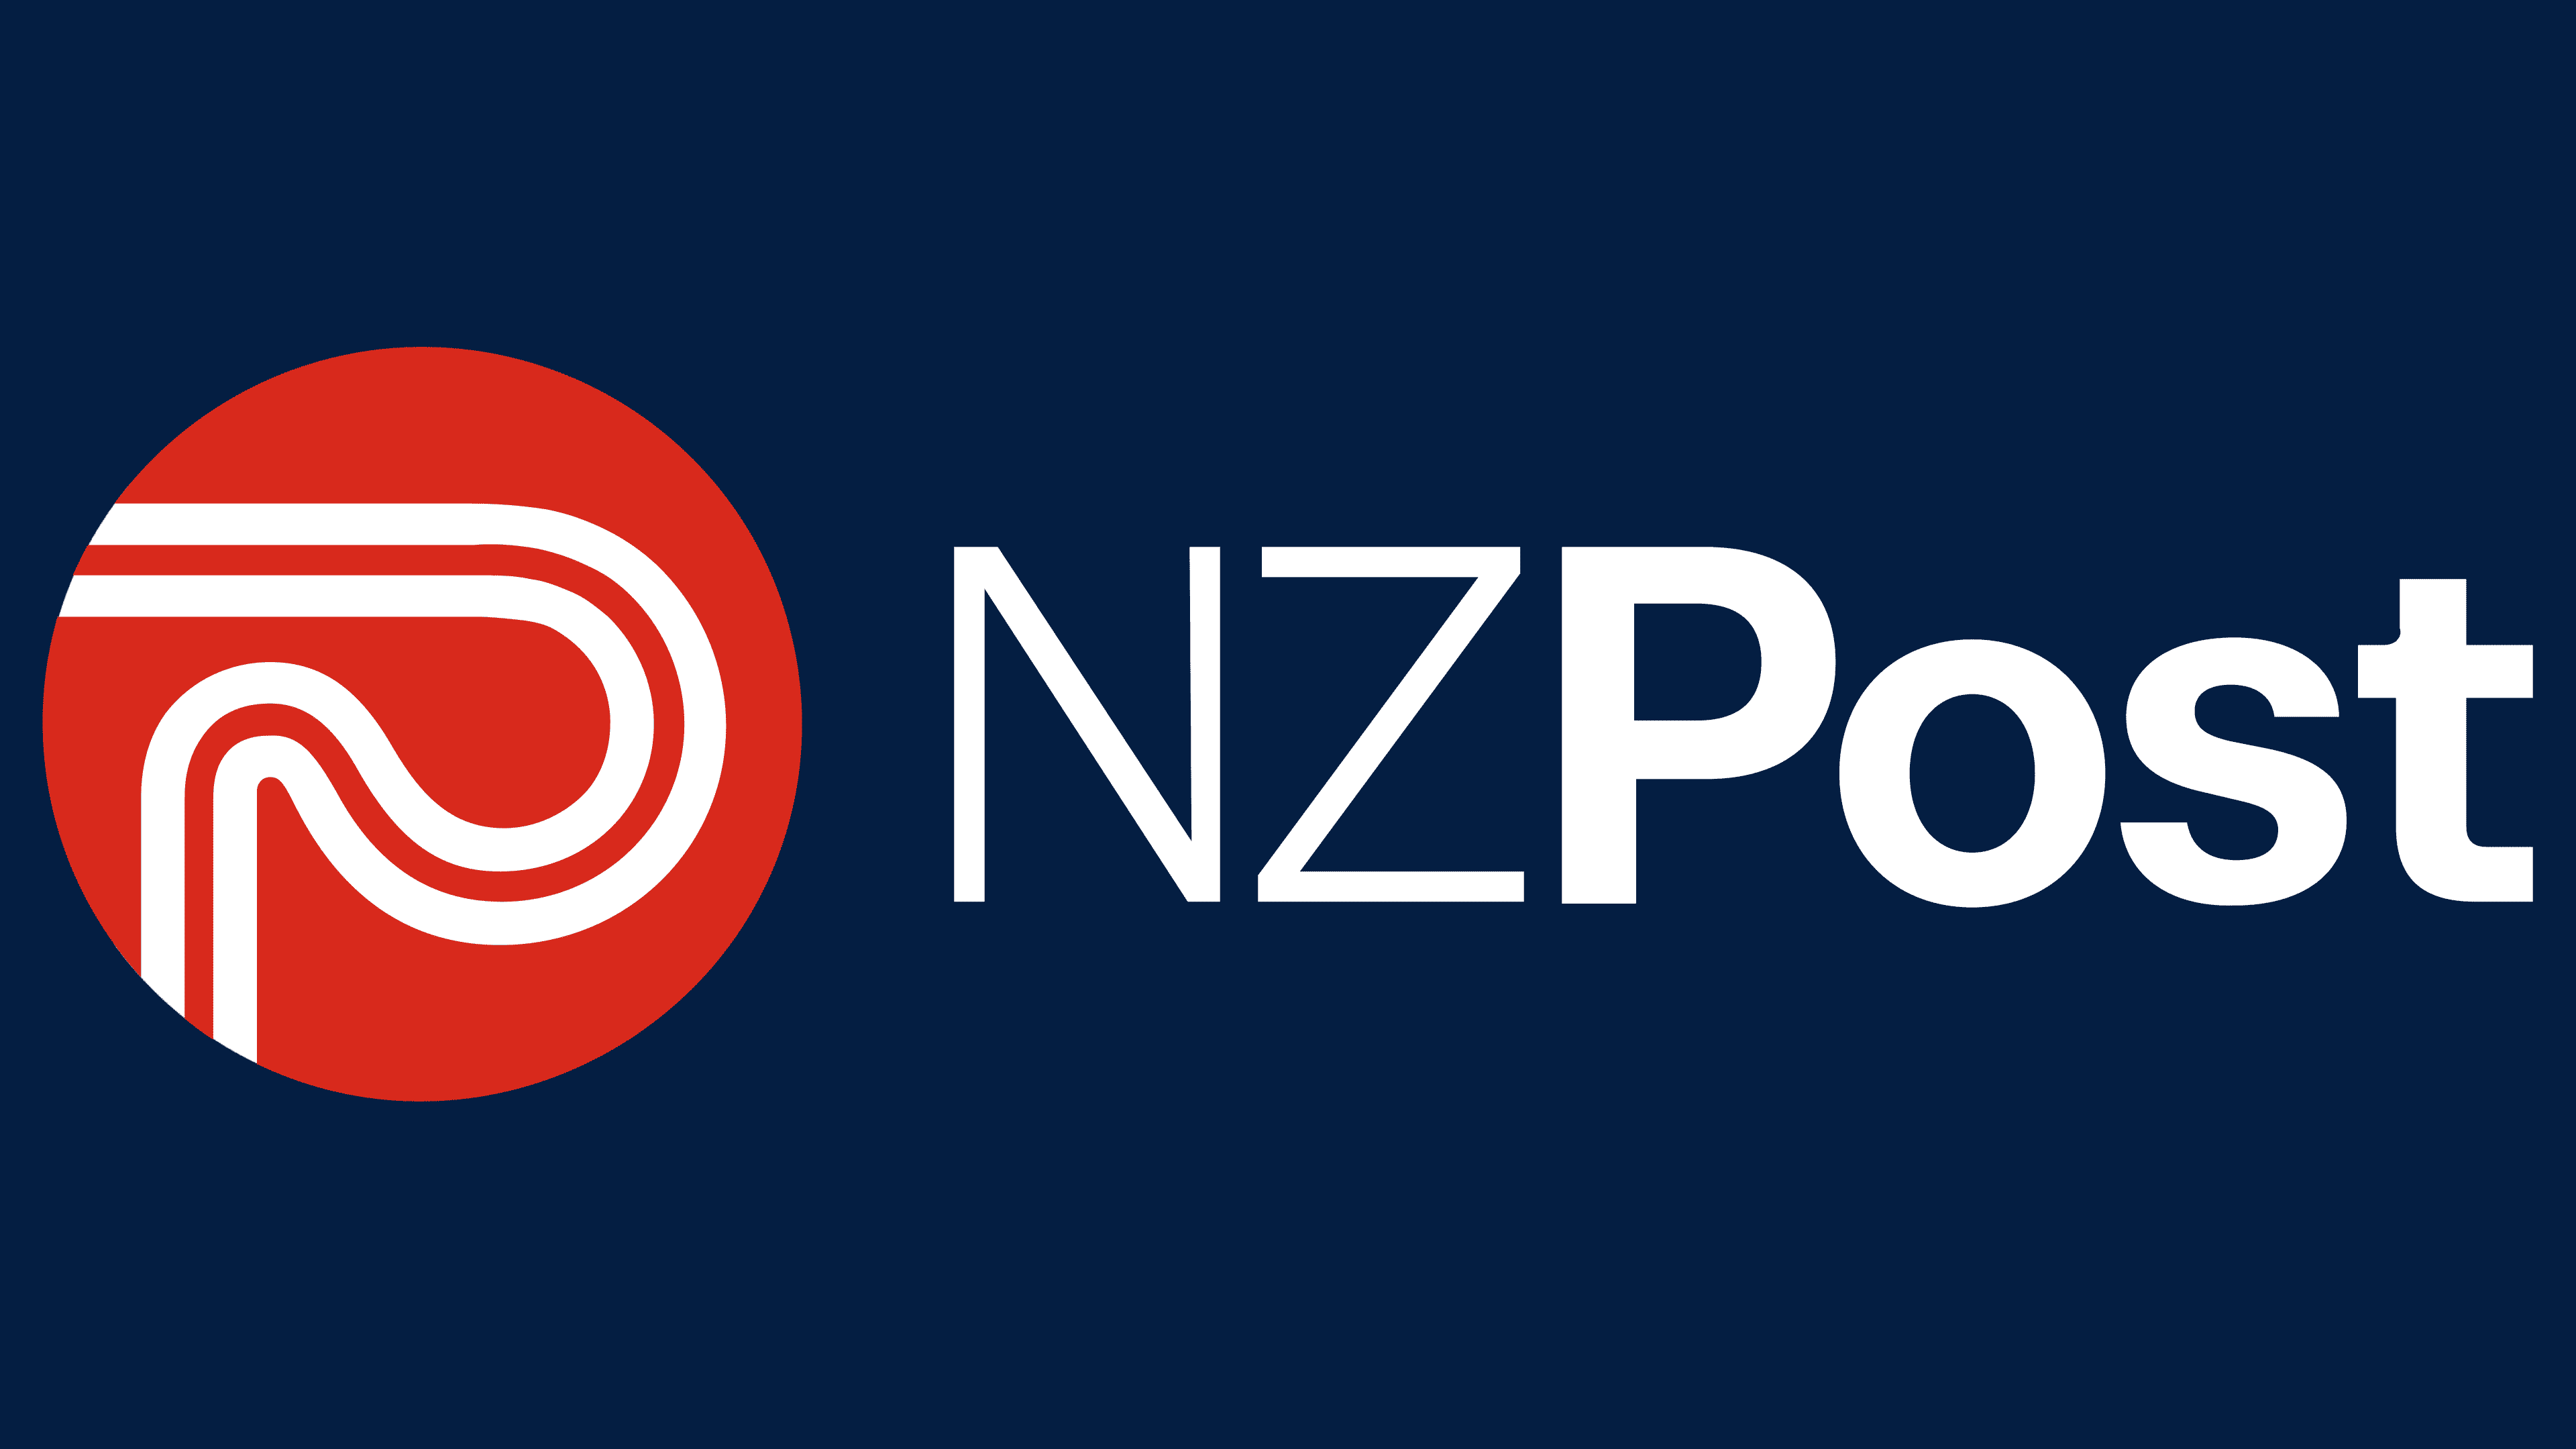 New logo and visual style for the NZ Post